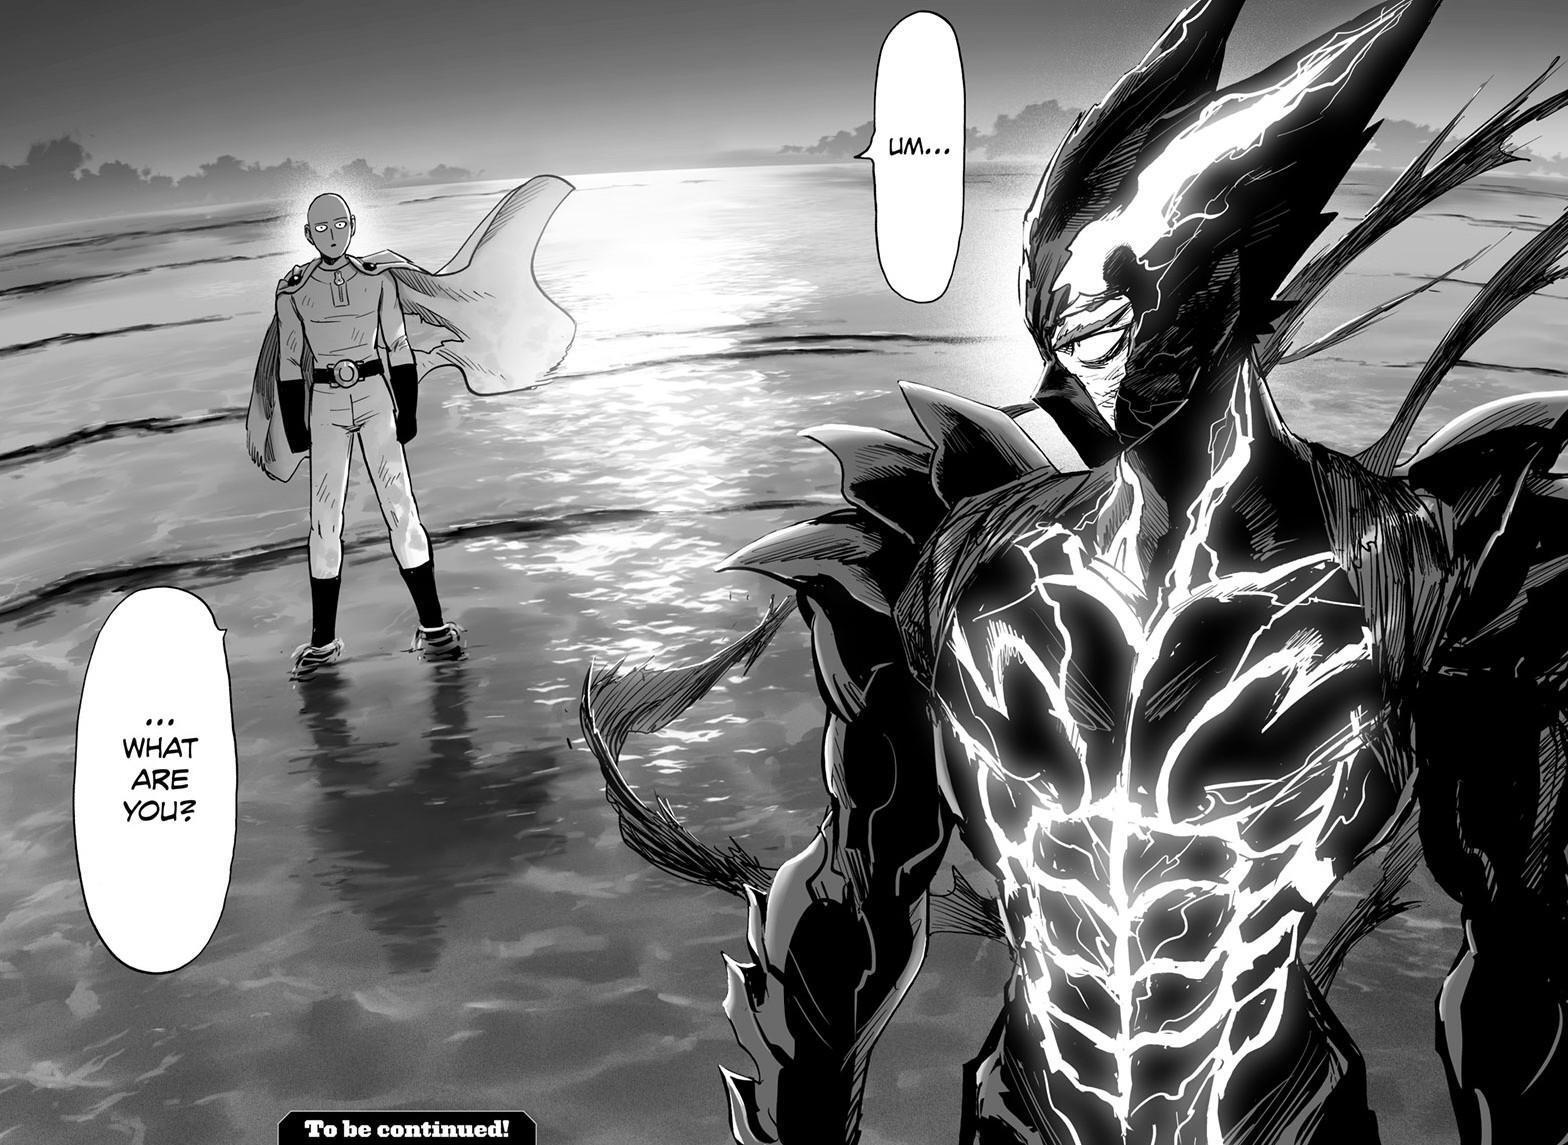 How far does Cosmic Fear Awakened Garou scales if we compared him